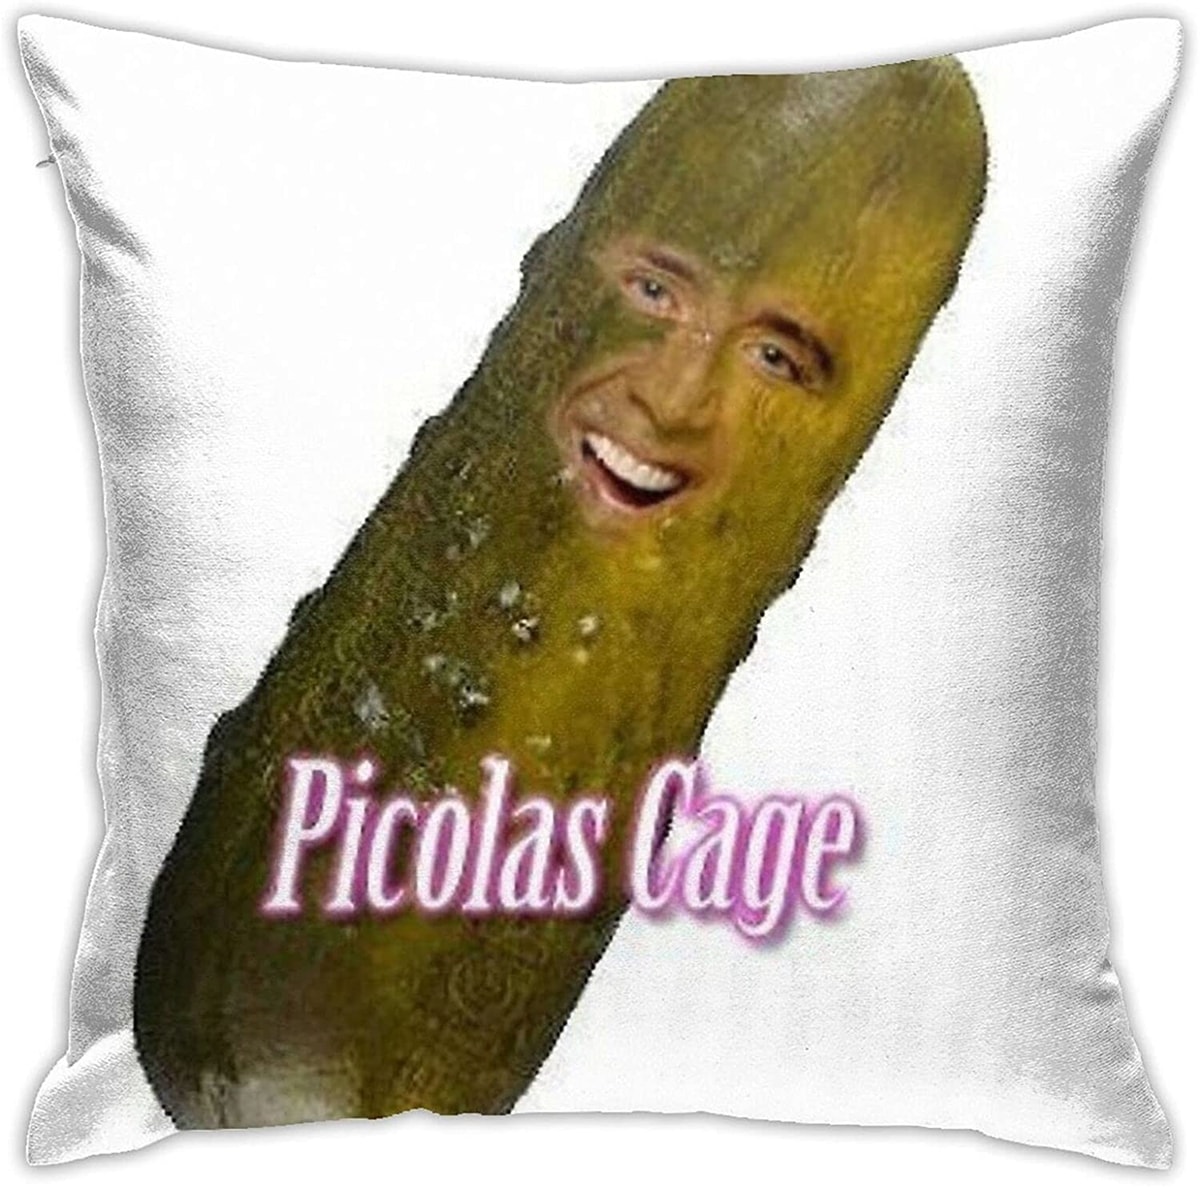 The plush fabric Picolas Cage pillowcase is soft and comfortable